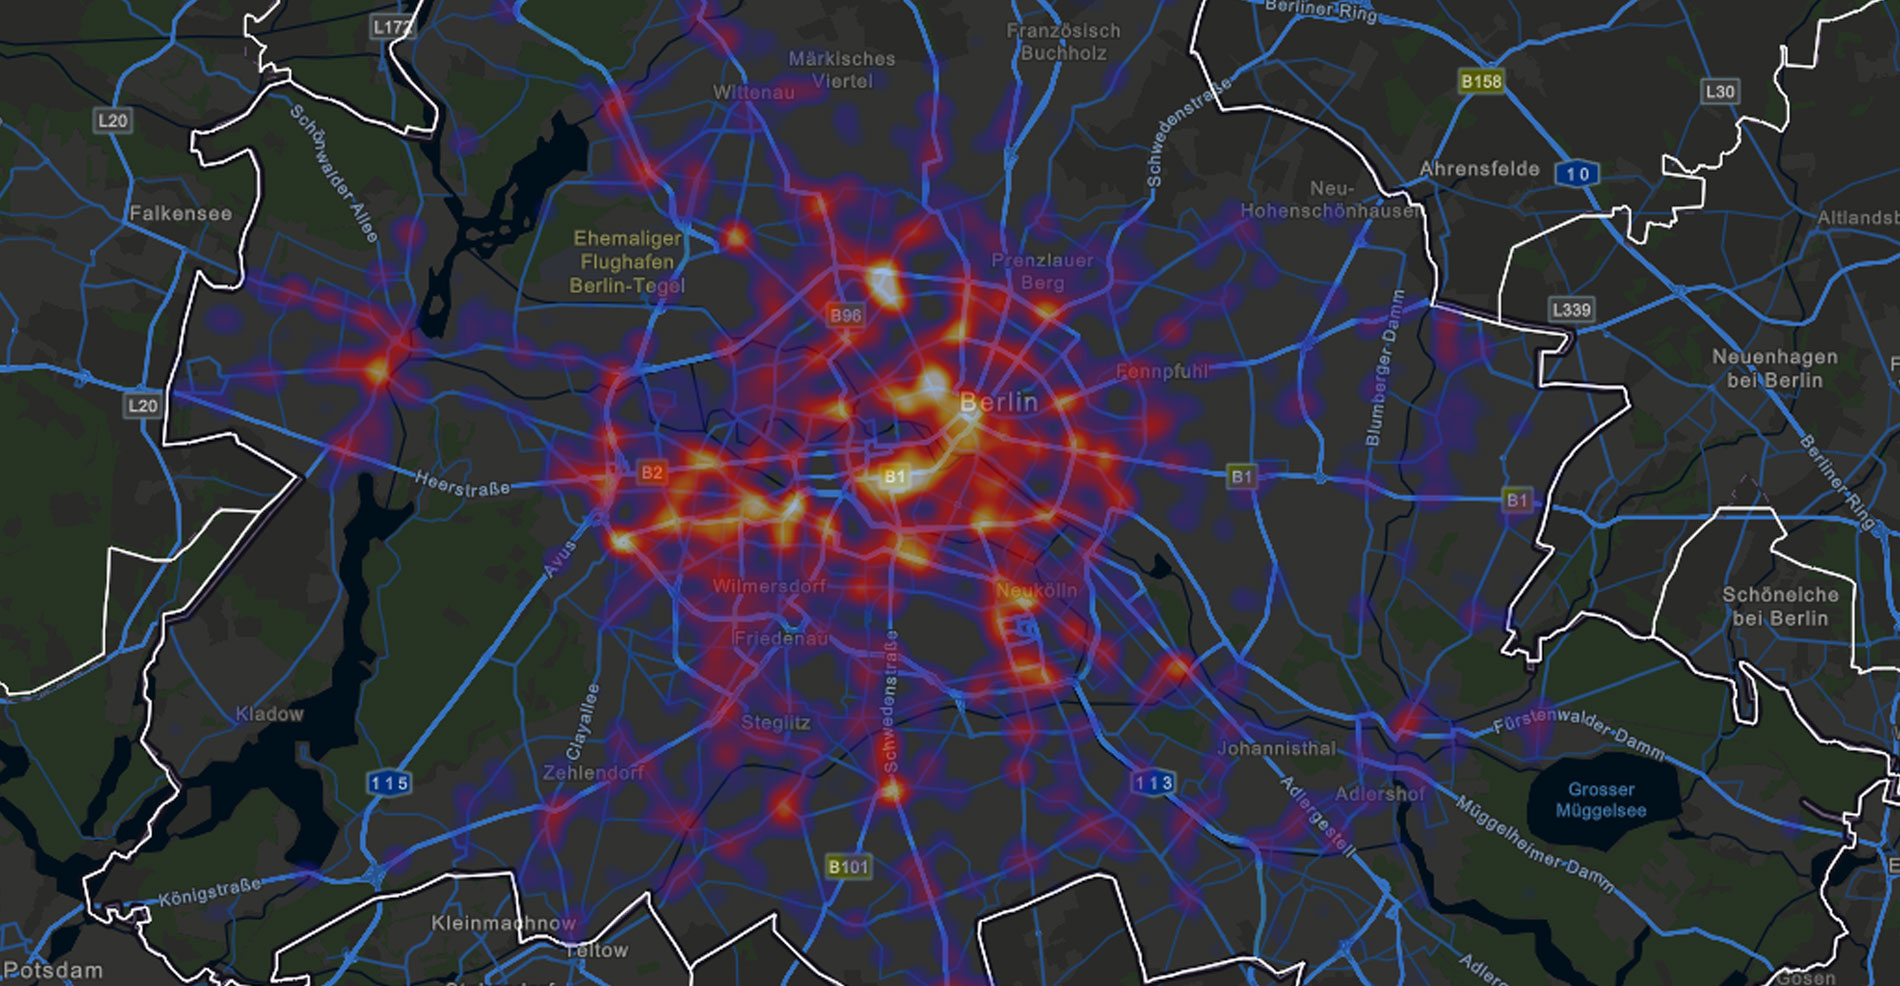 The image shows a map of Berlin, on which the hotspots for traffic accidents are highlighted in different colours